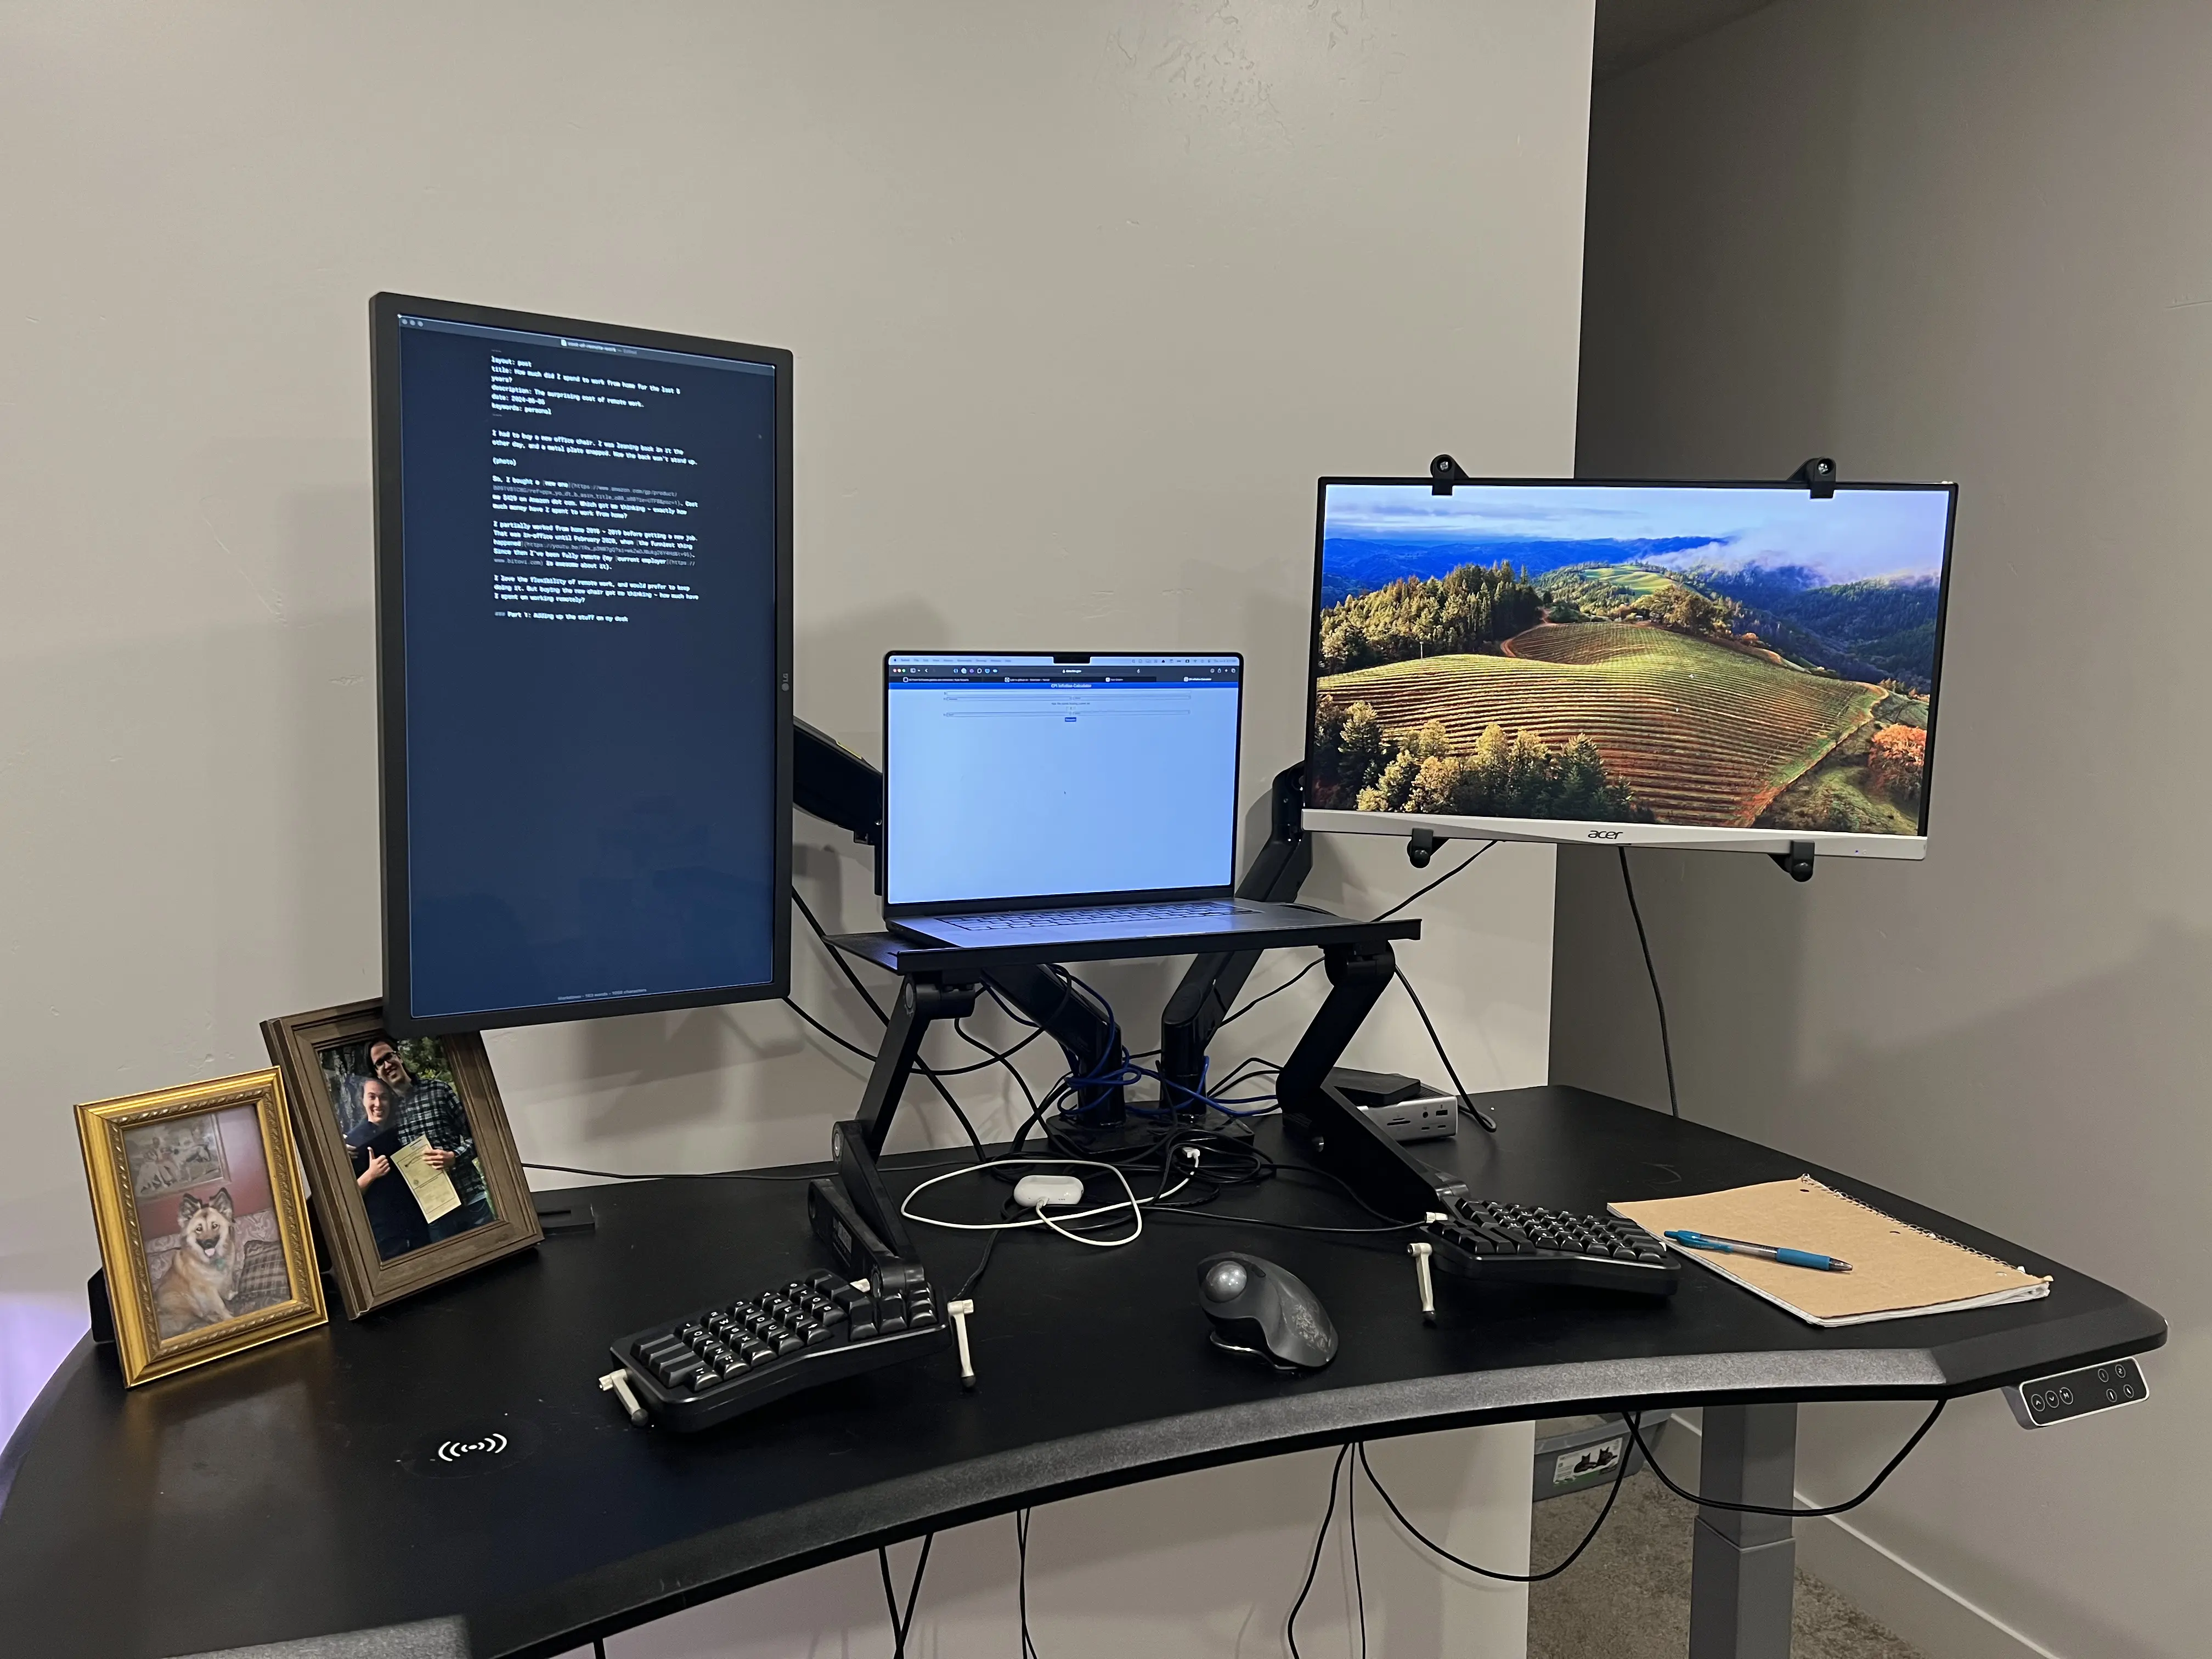 A standing desk with a laptop and two external monitors